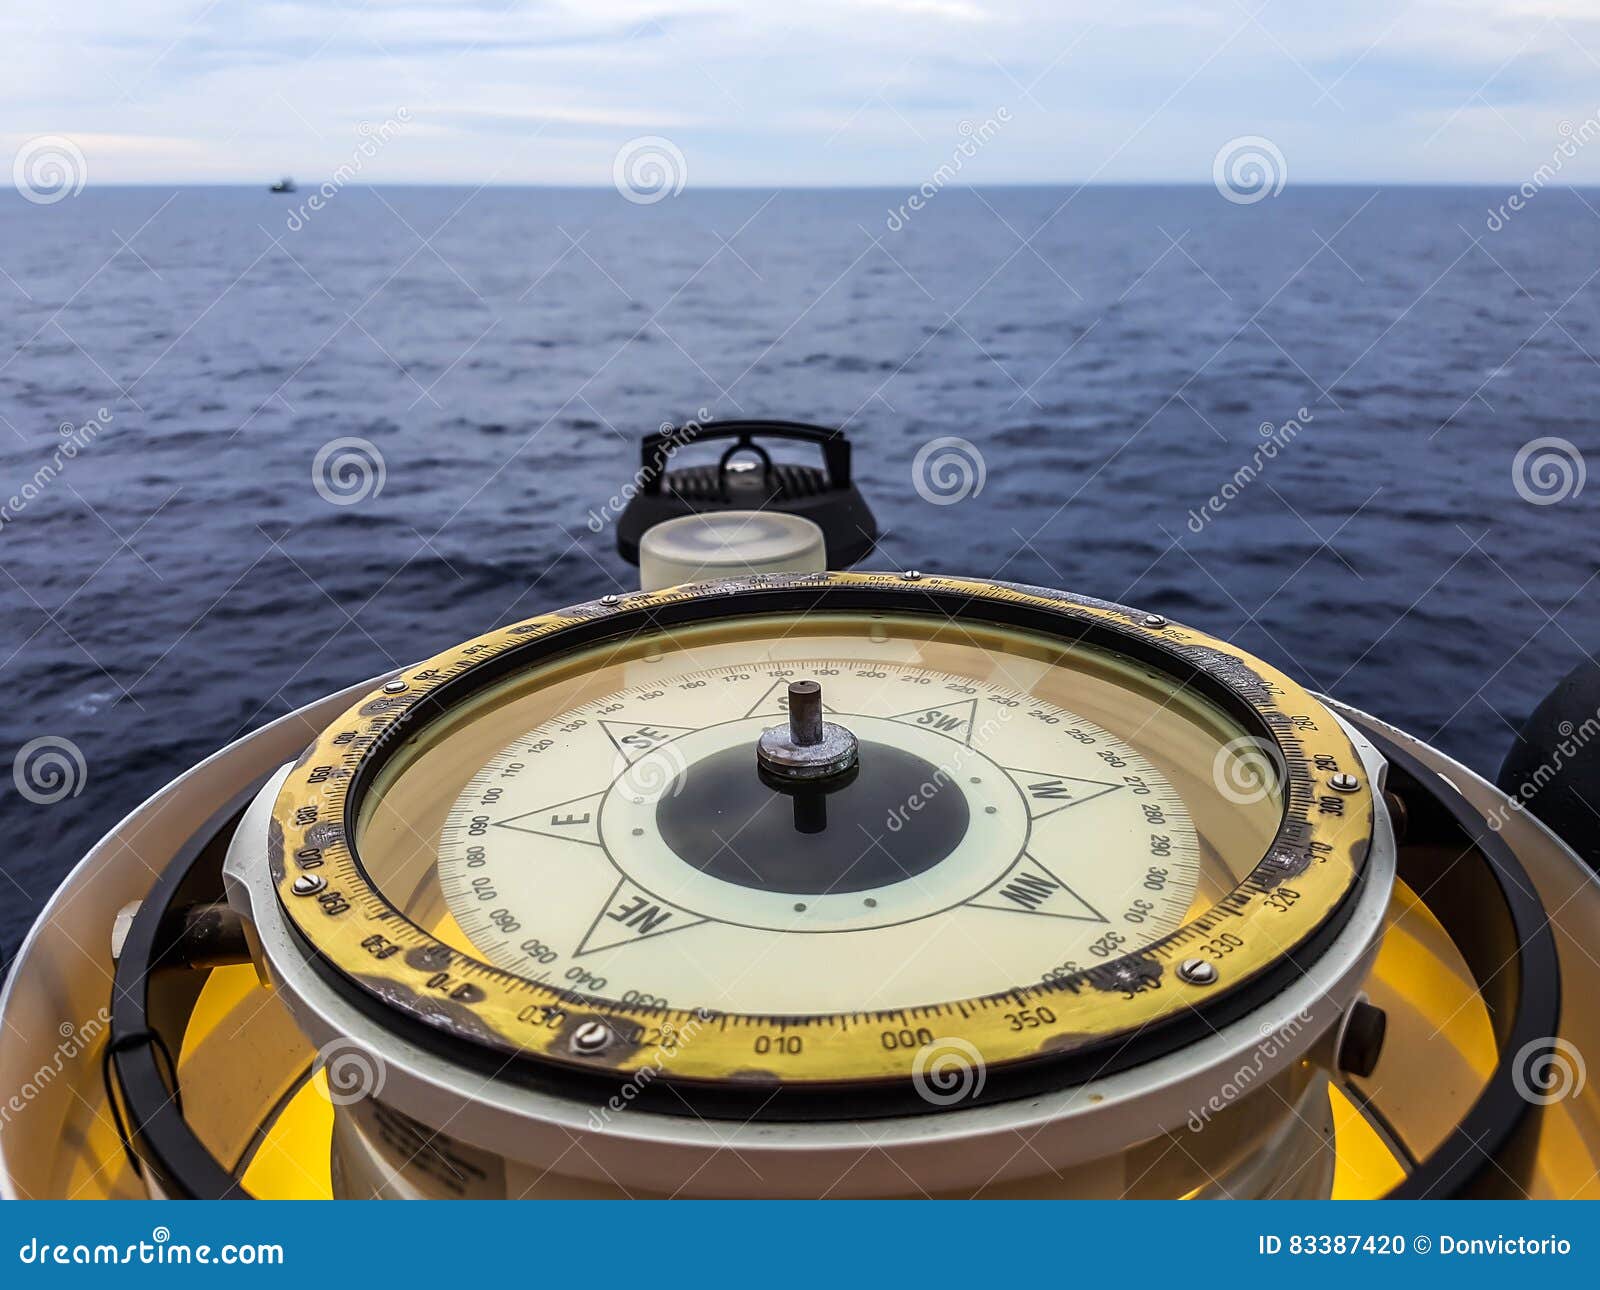 https://thumbs.dreamstime.com/z/magnetic-compass-aboard-ship-large-blue-summer-sea-ocean-day-83387420.jpg